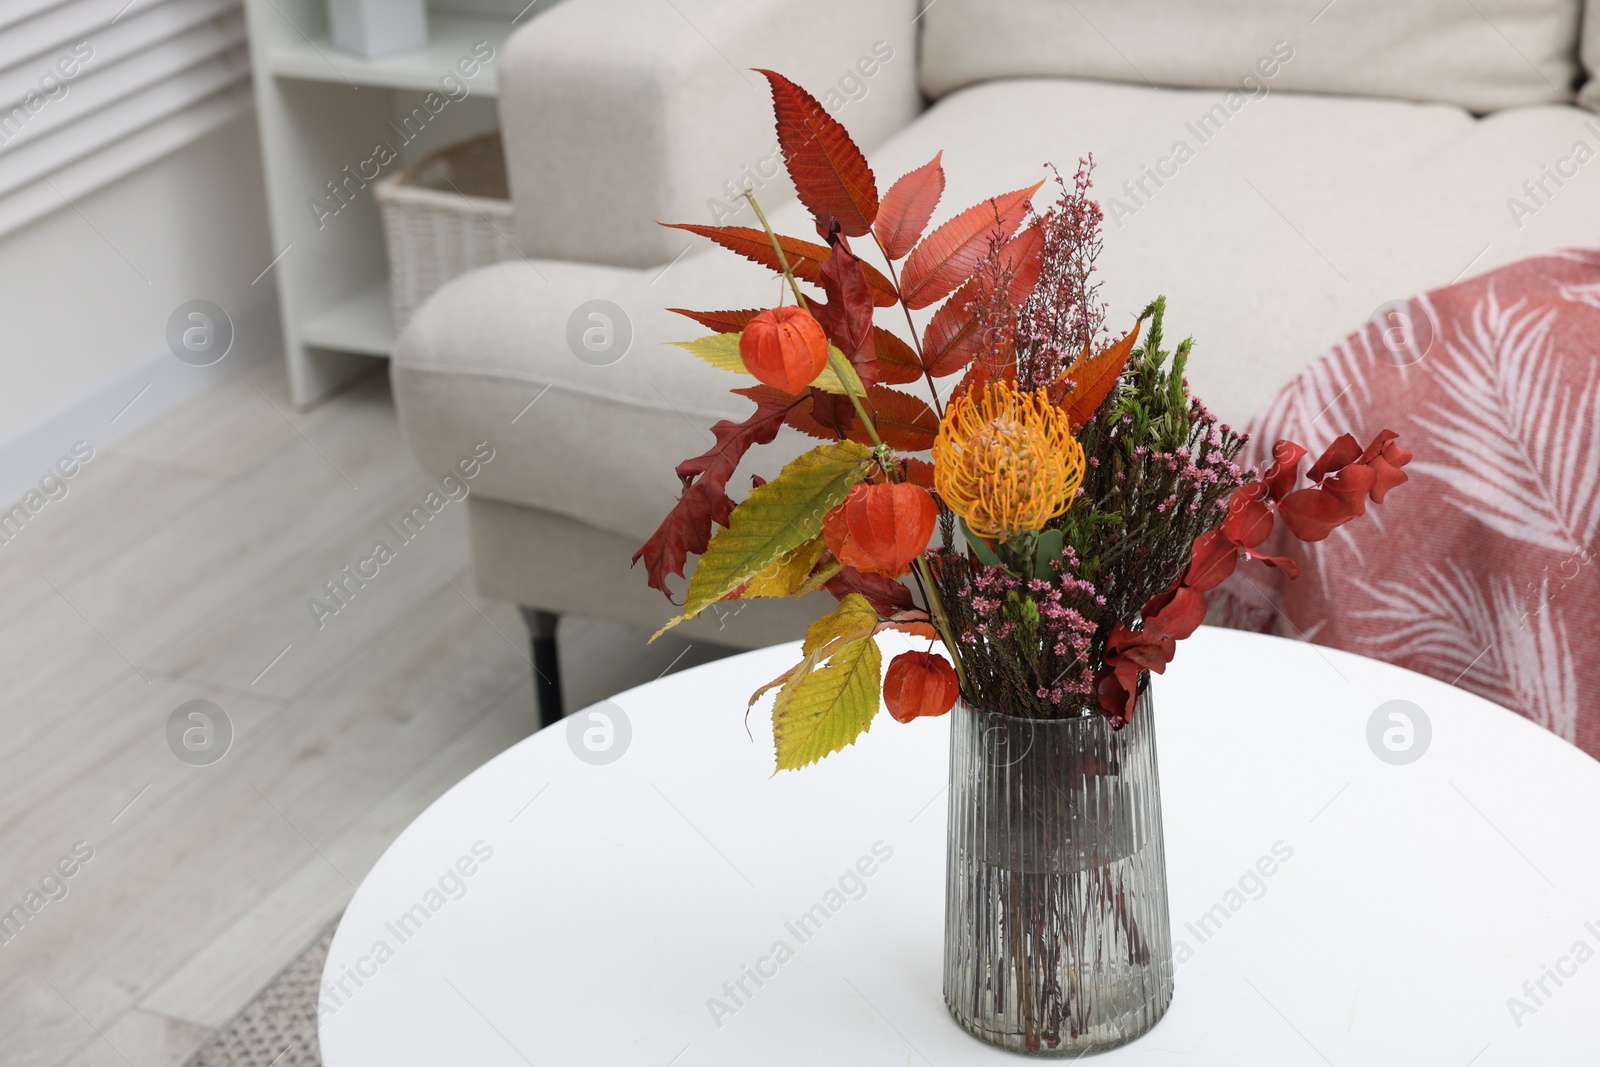 Photo of Vase with bouquet of dry flowers and leaves on side table indoors, space for text